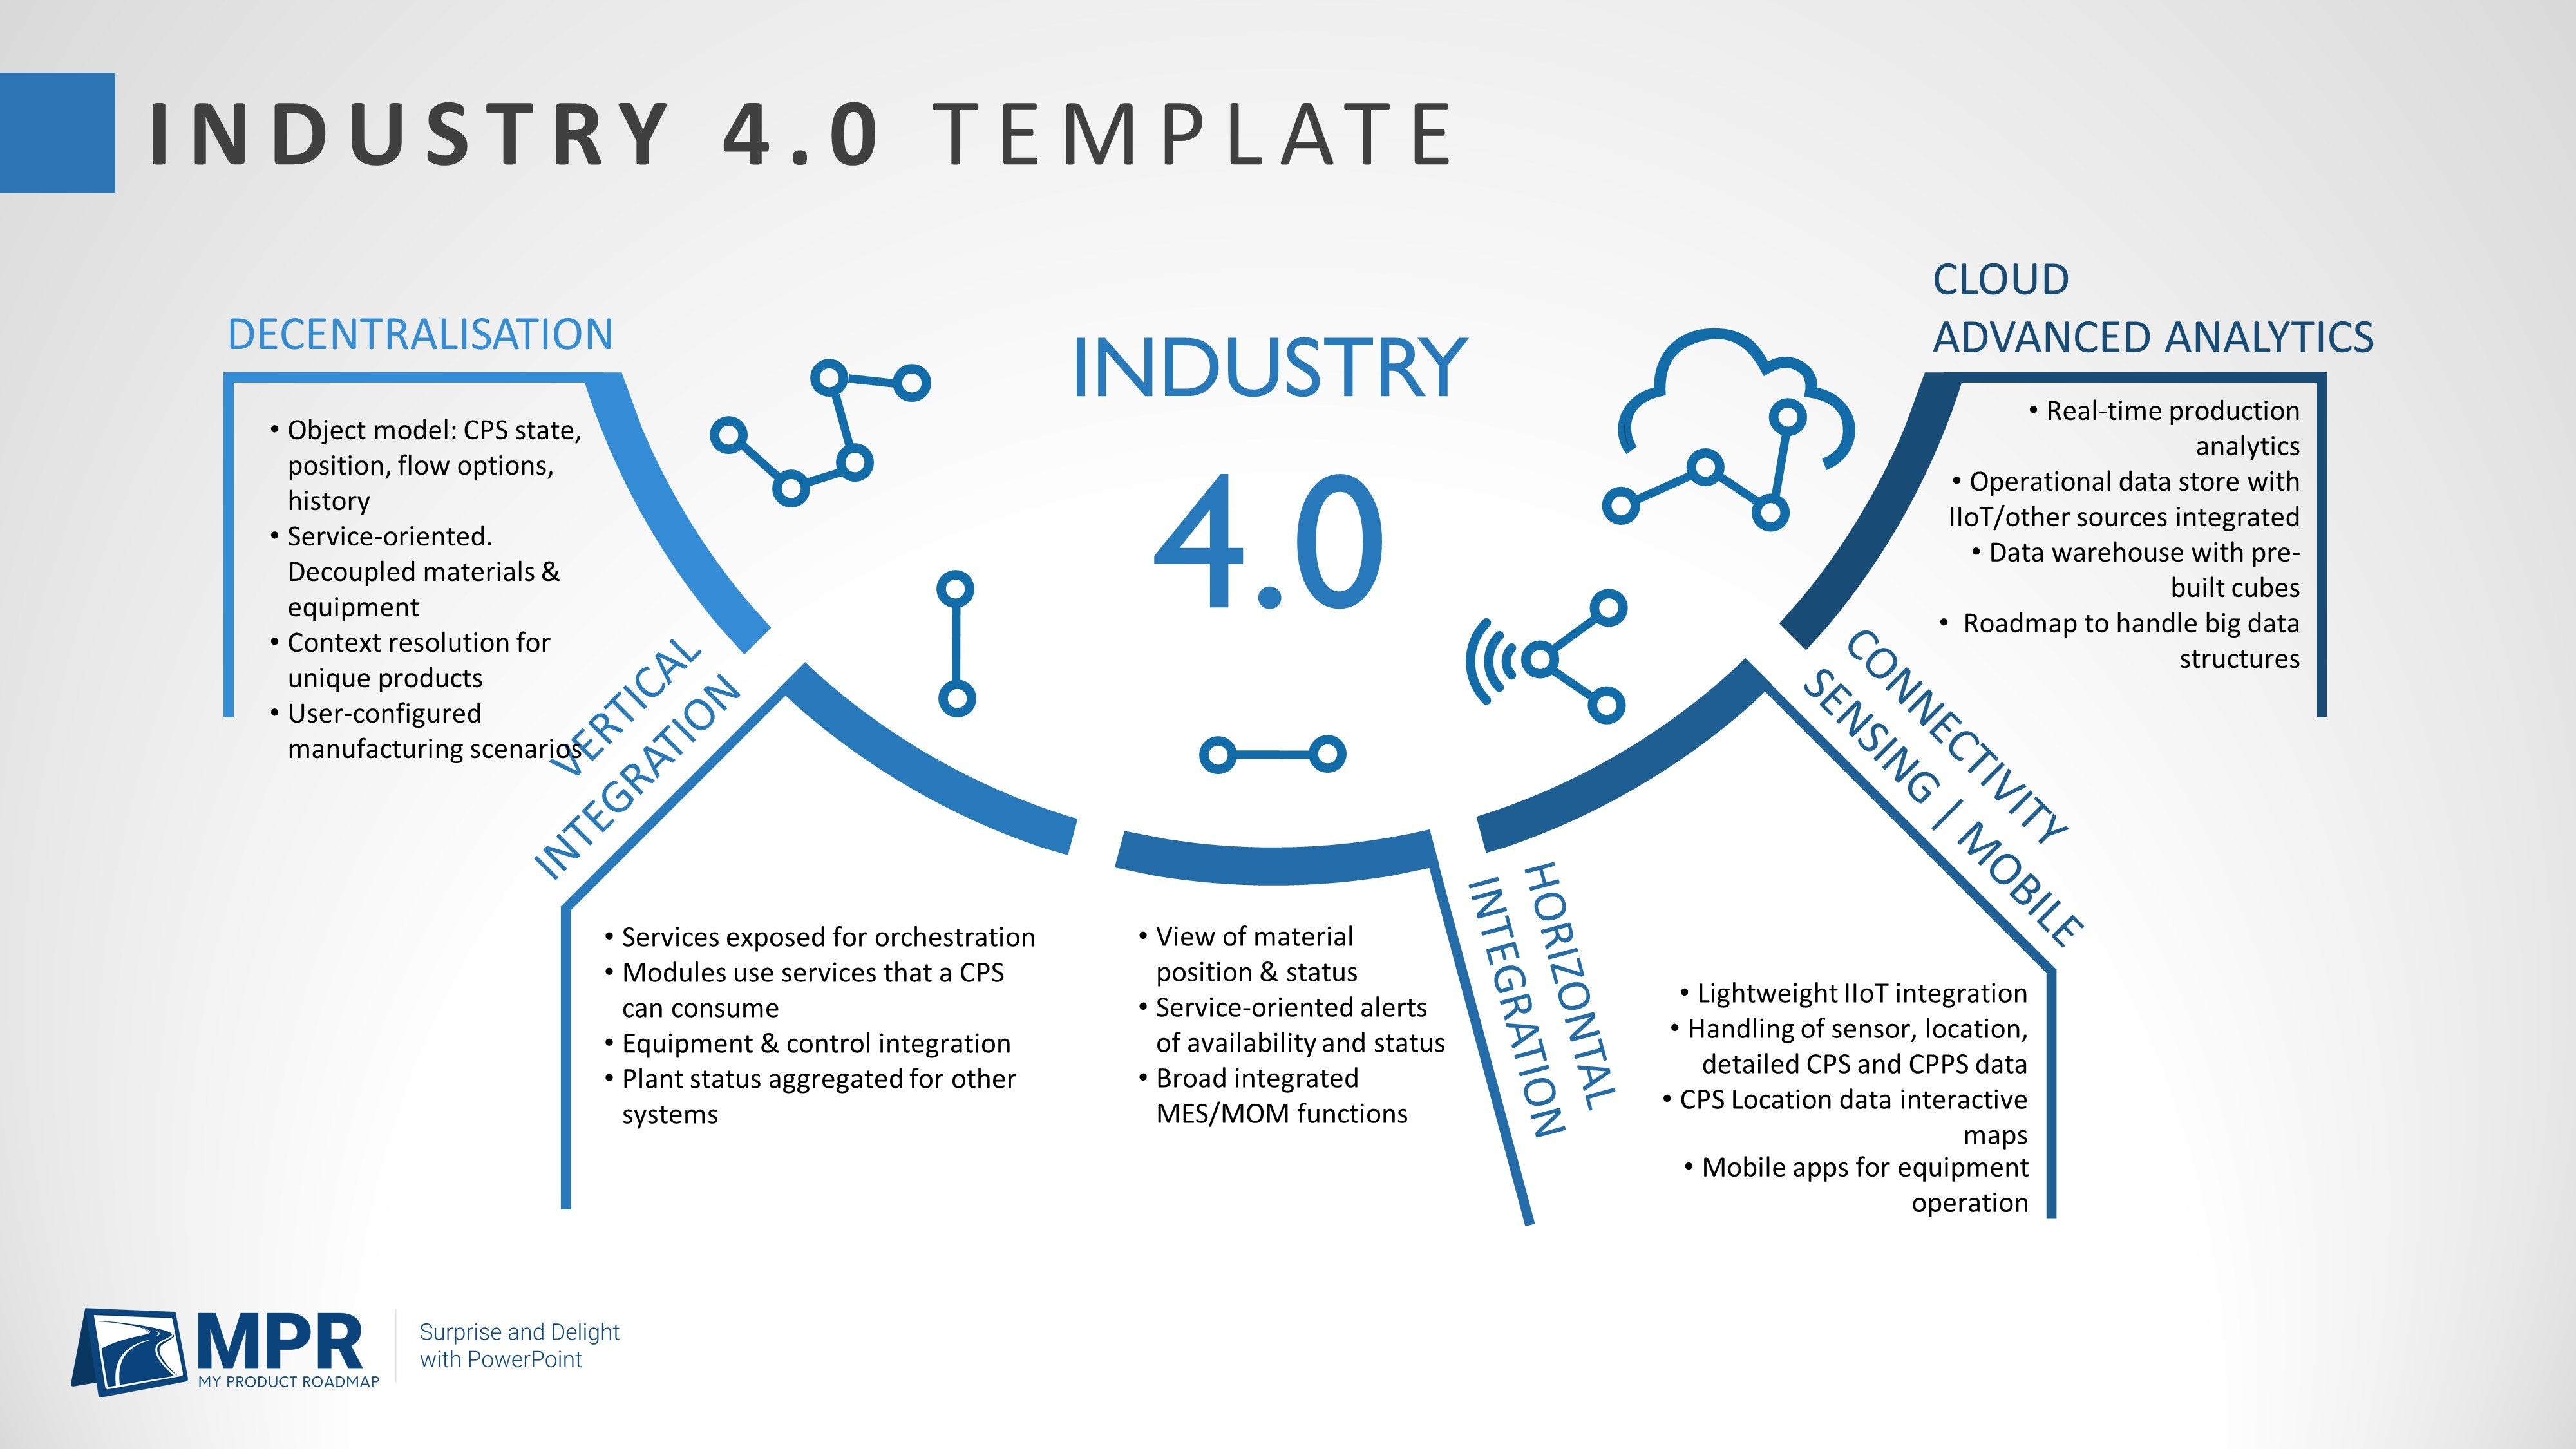 paper presentation on industry 4.0